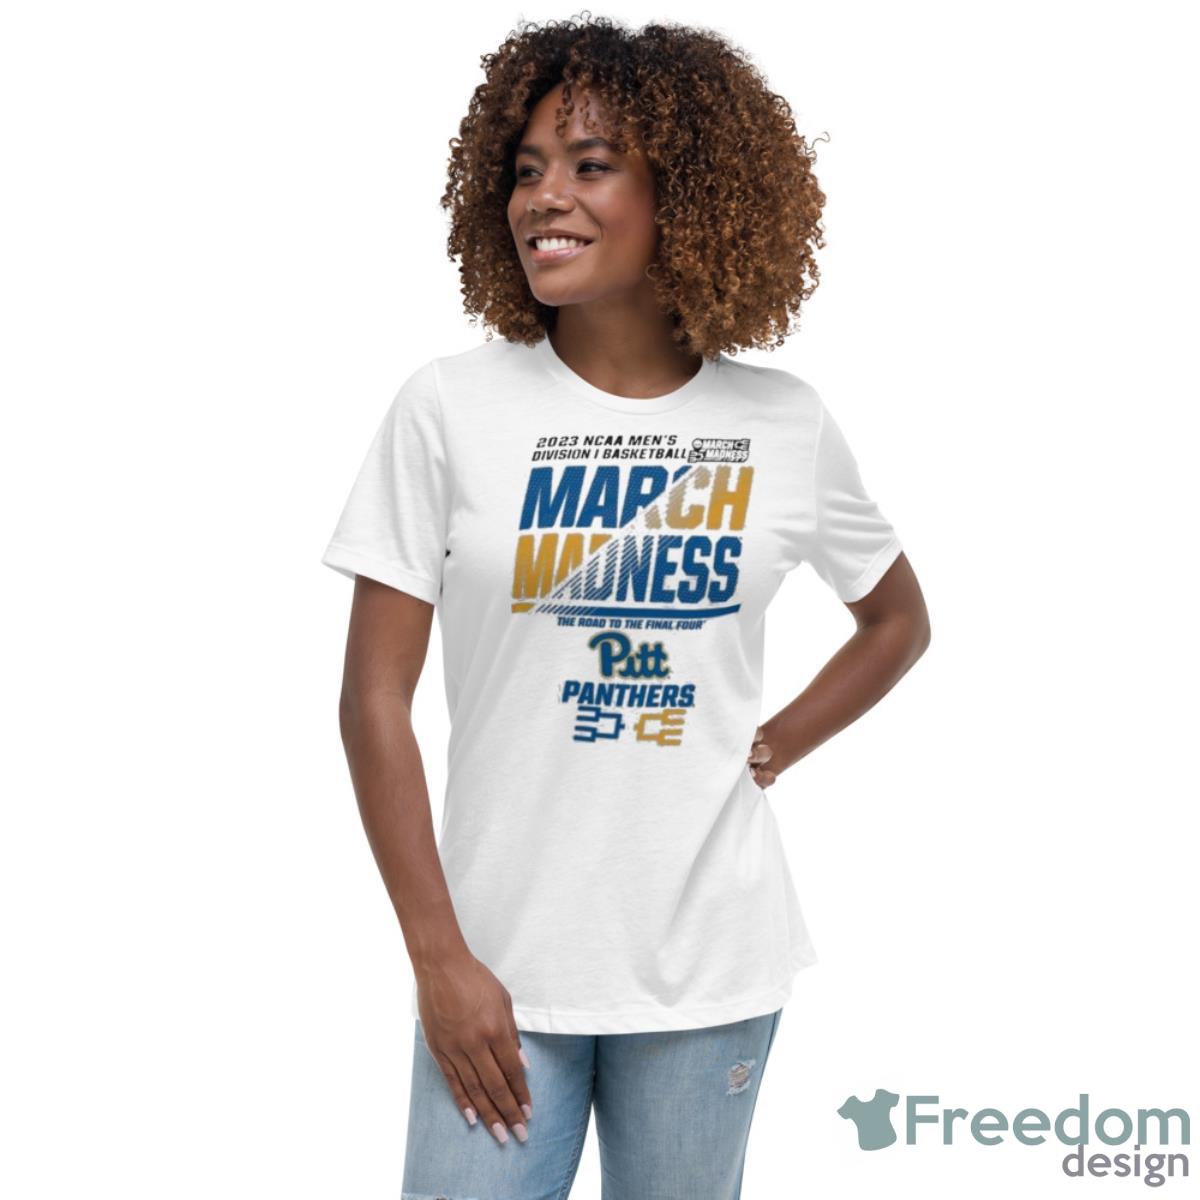 Pitt Panthers Men’s Basketball 2023 NCAA March Madness The Road To Final Four Shirt